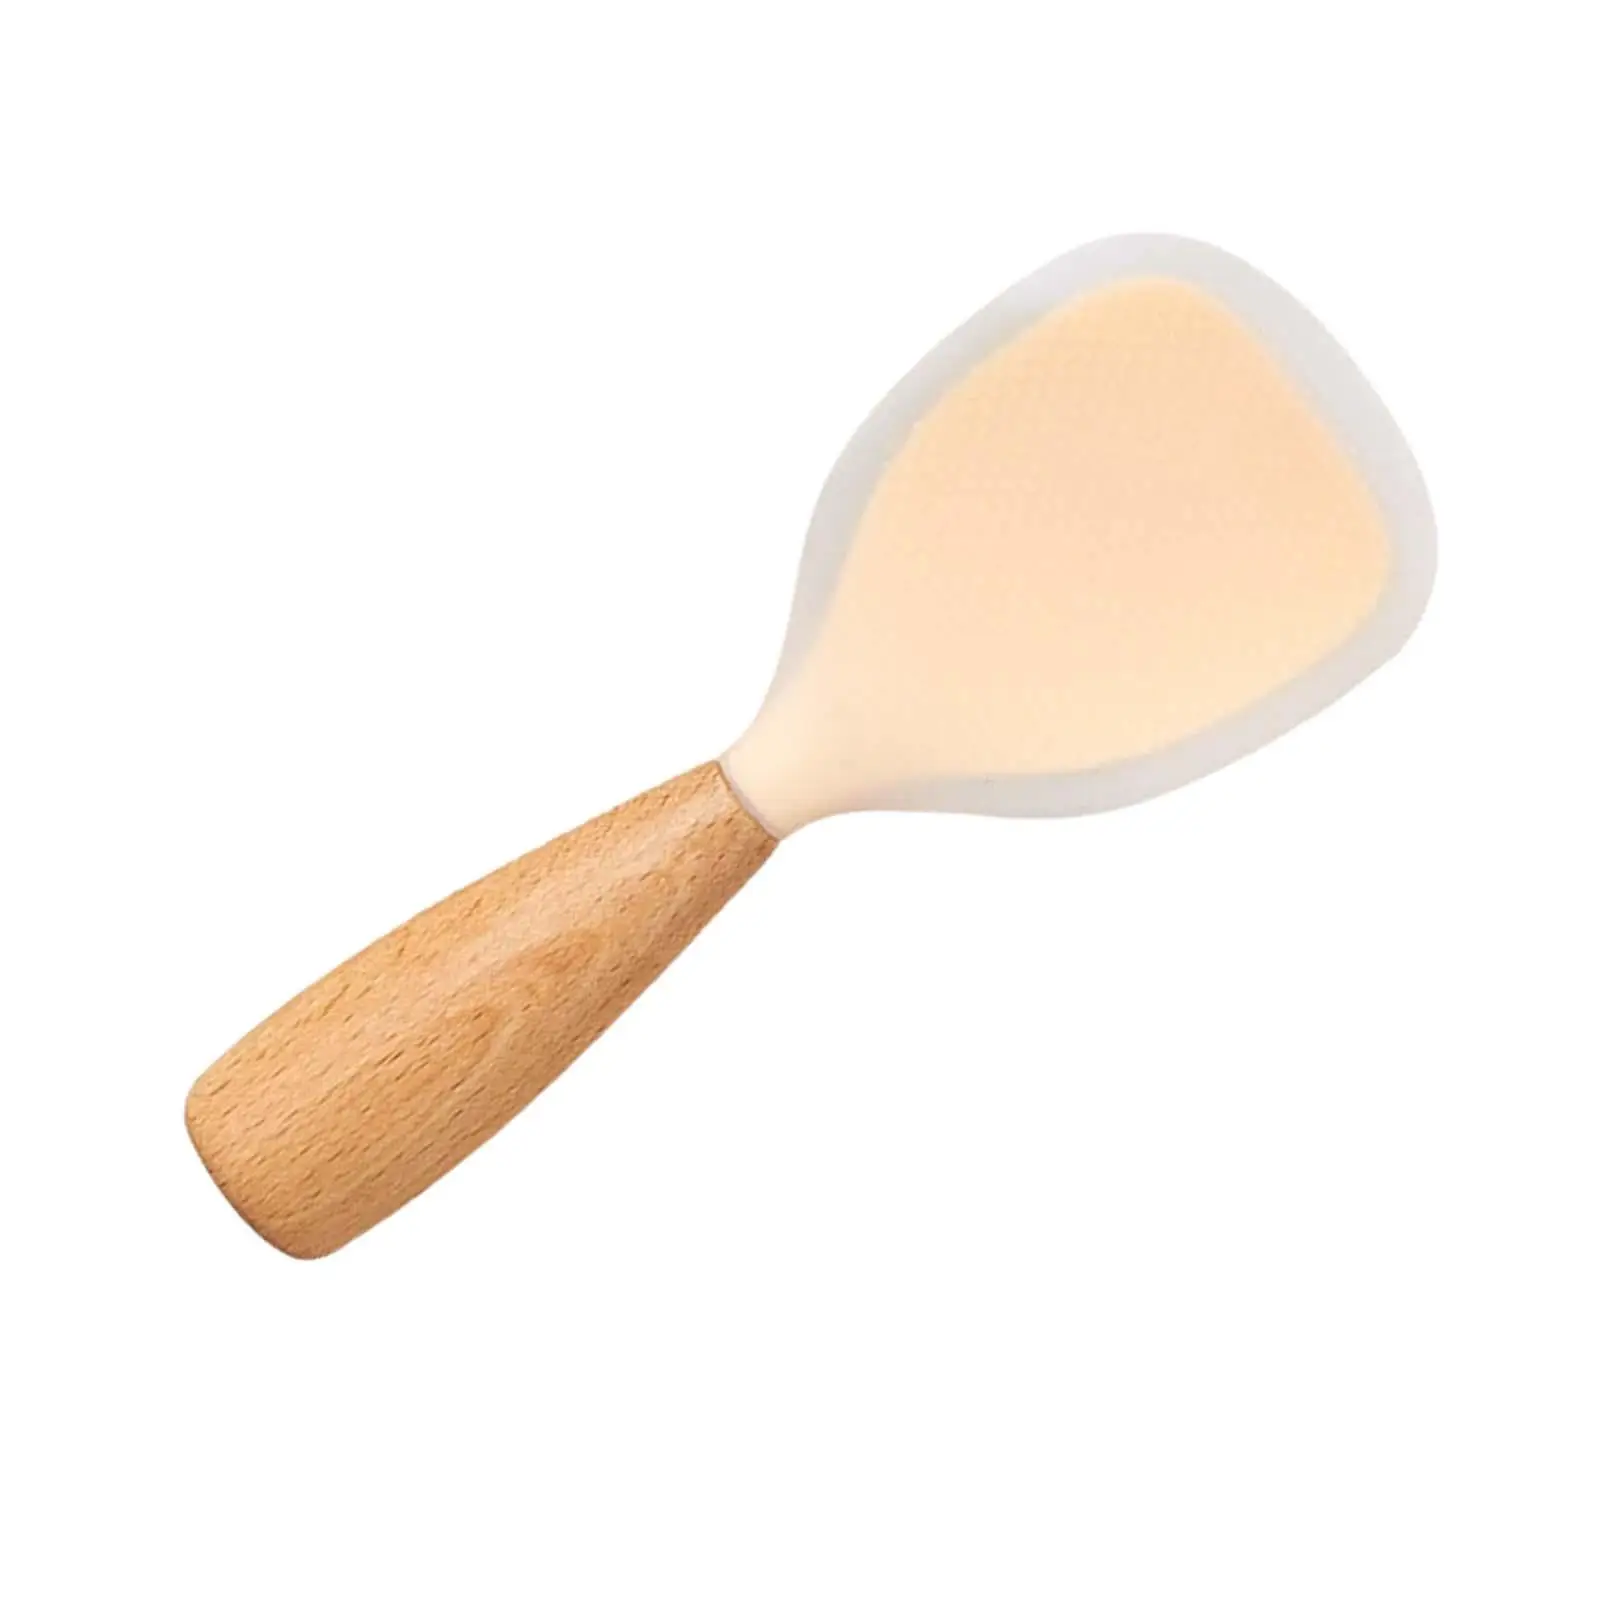 Rice Paddle Reusable Cooking Utensil with Wood Handle Food Service Scoop for Home Mashed Potato Sushi Rice Gadgets